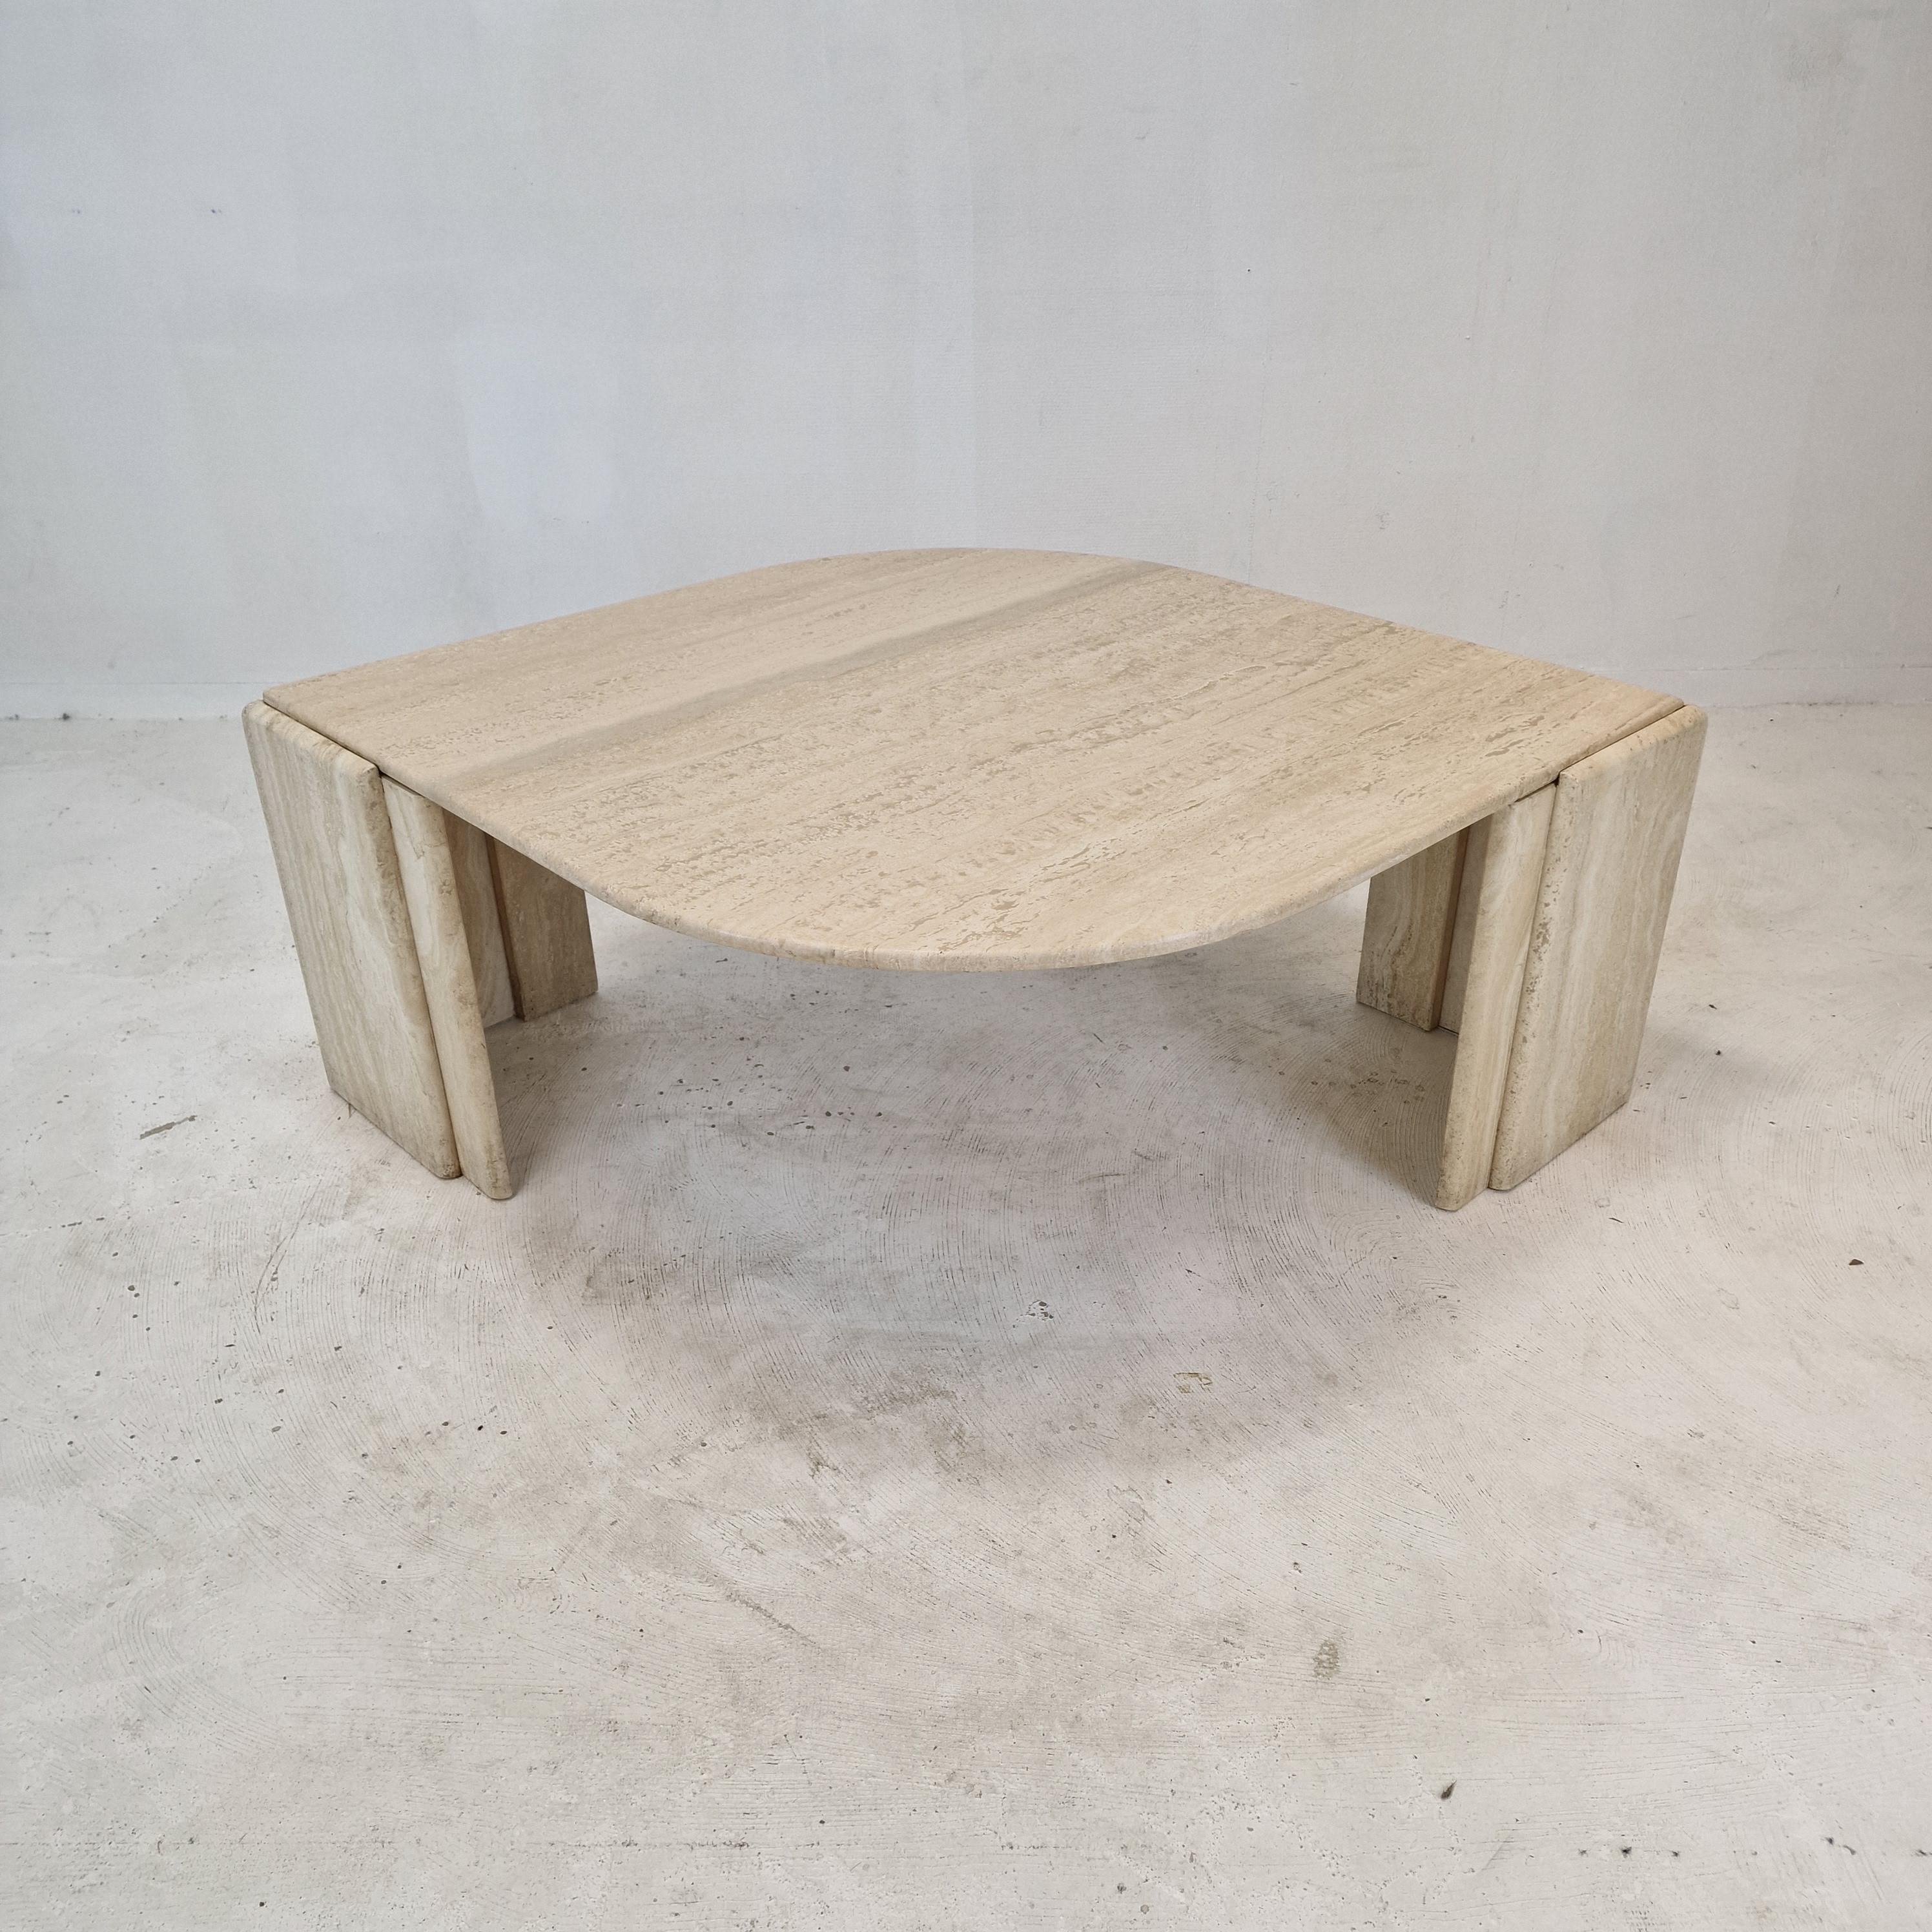 Very elegant Italian coffee table handcrafted out of travertine, 1980's.

The beautiful teardrop shaped top is rounded on the edge. 
It is made of beautiful travertine.

The base is made of two separate pieces.

It has the normal traces of